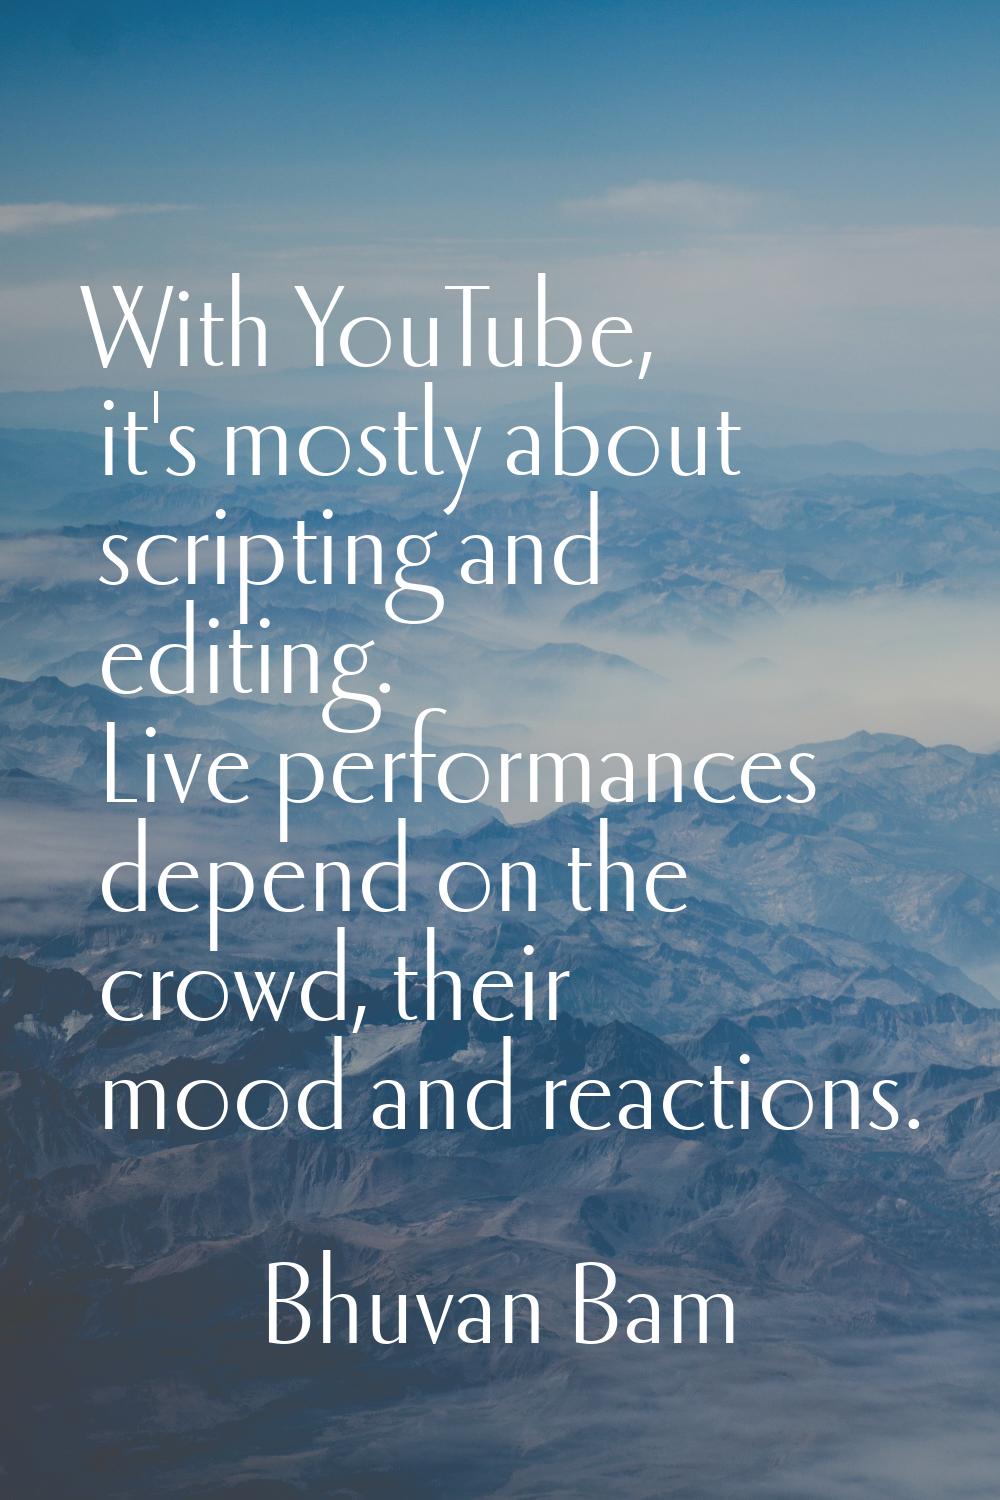 With YouTube, it's mostly about scripting and editing. Live performances depend on the crowd, their